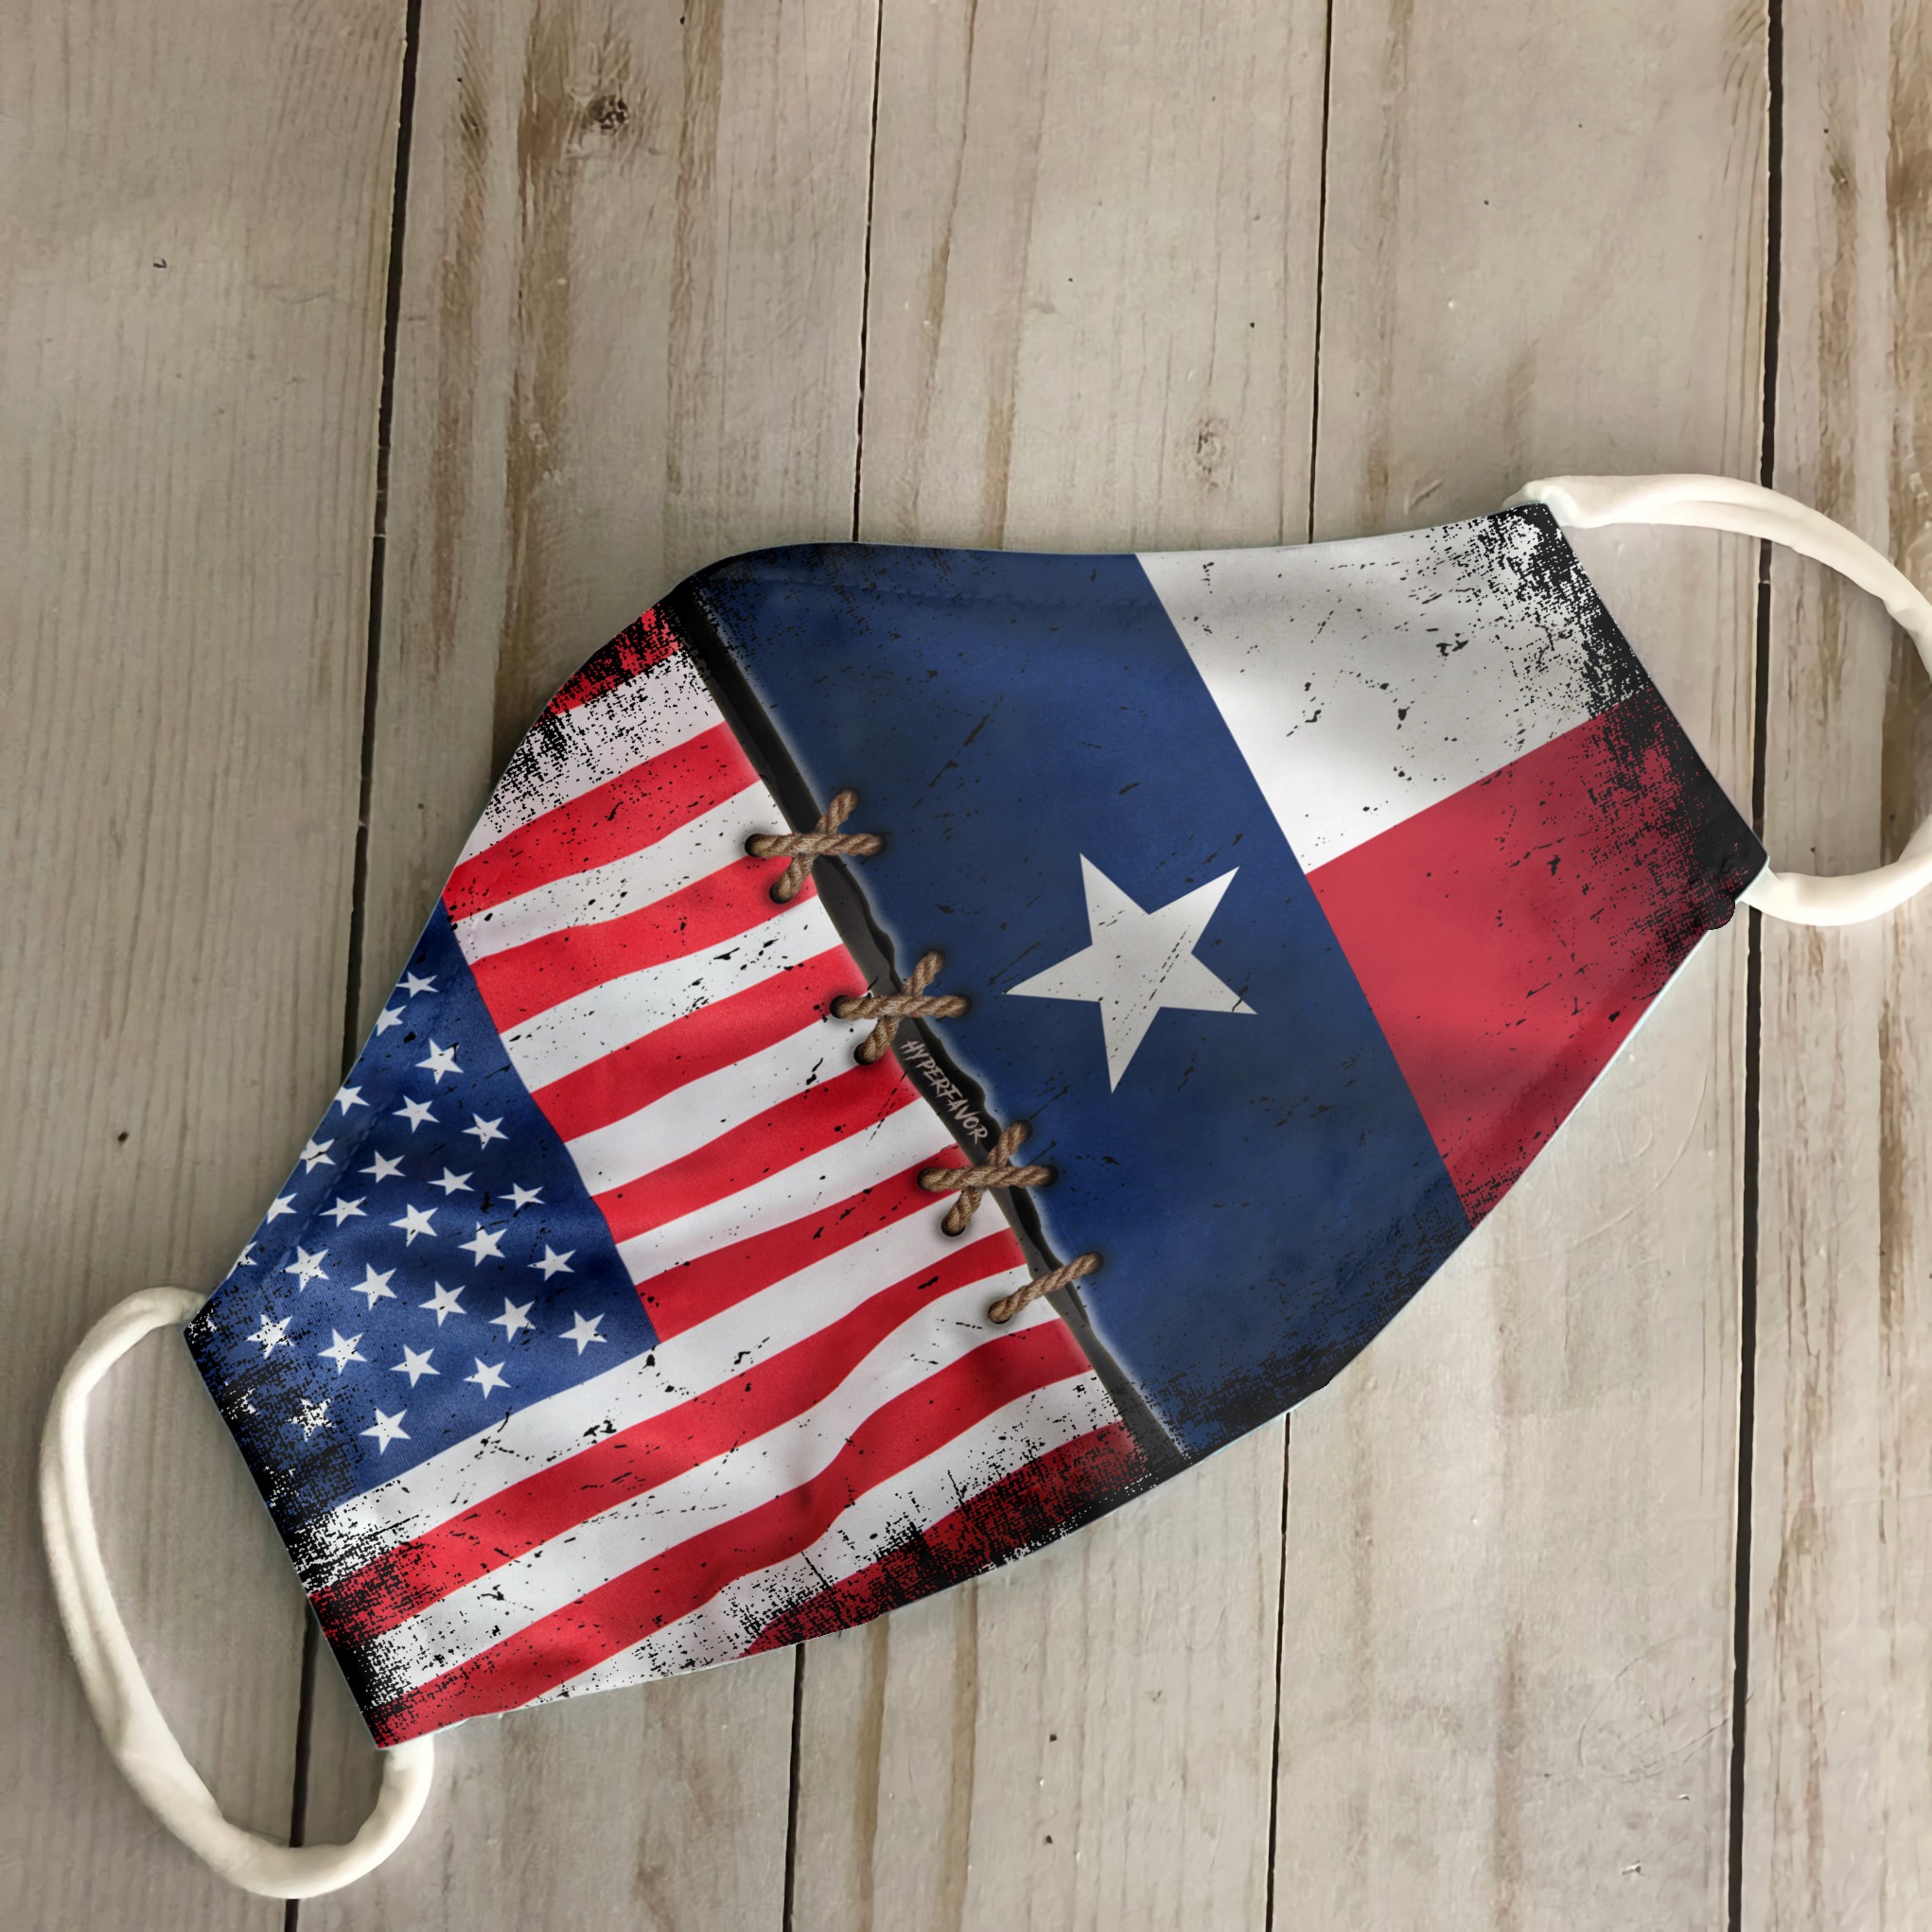 Texas American flag face mask - pic 2